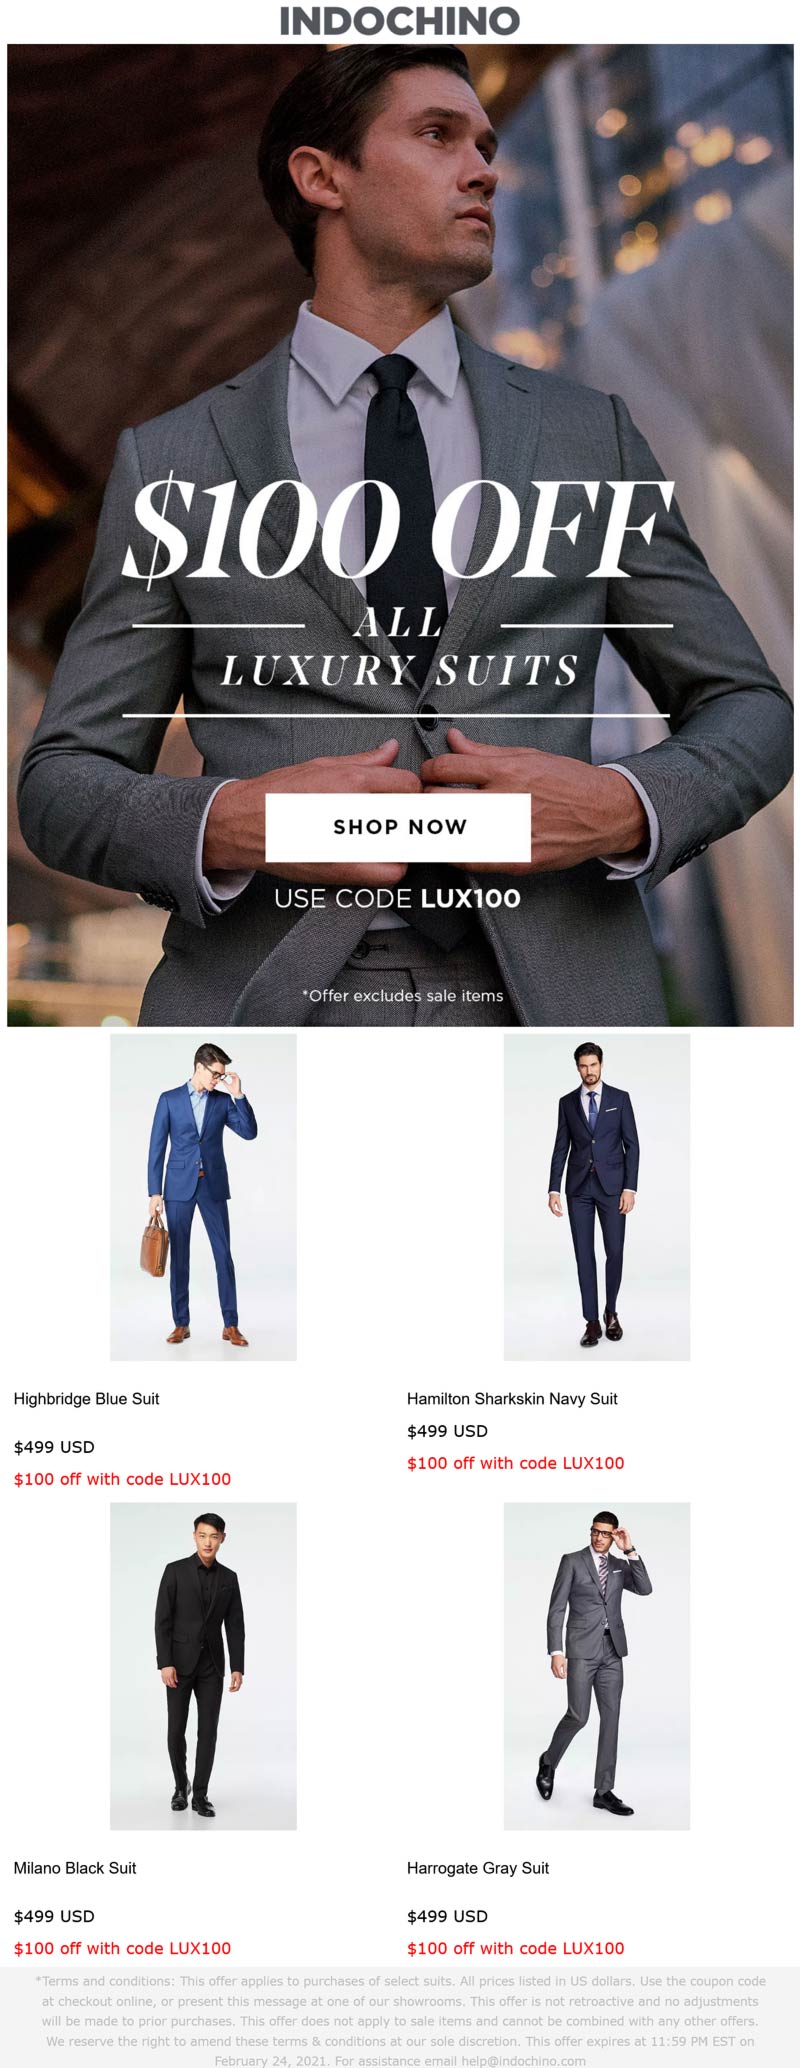 Indochino stores Coupon  $100 off all suits today at Indochino via promo code LUX100 #indochino 